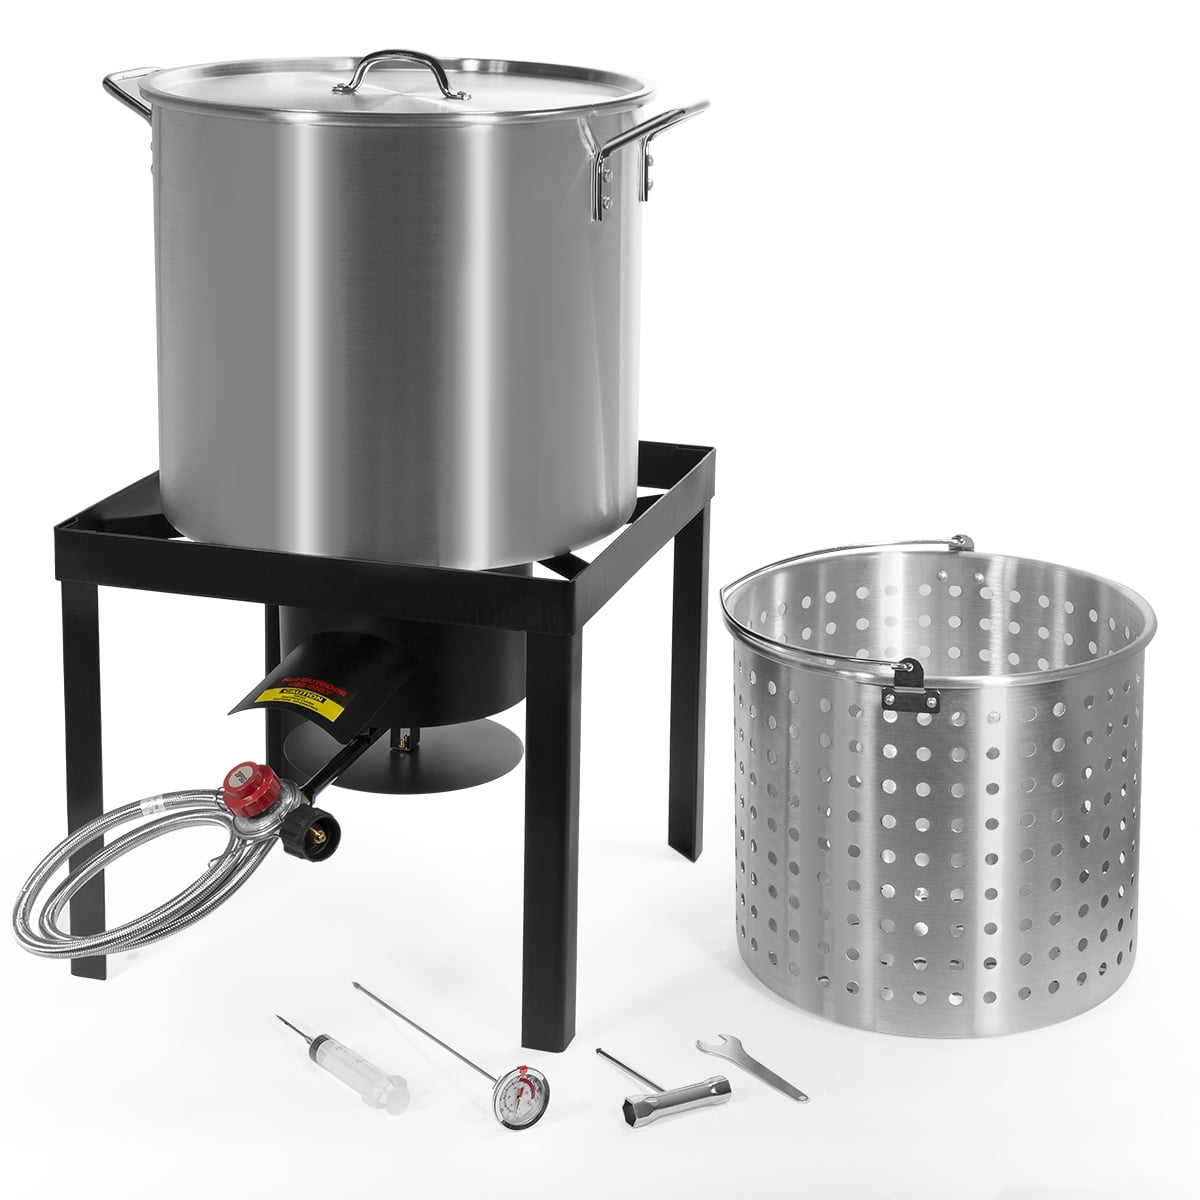 Bayou Classic 3016 30-Quart Outdoor Turkey Fryer with Basket and Fry Pot